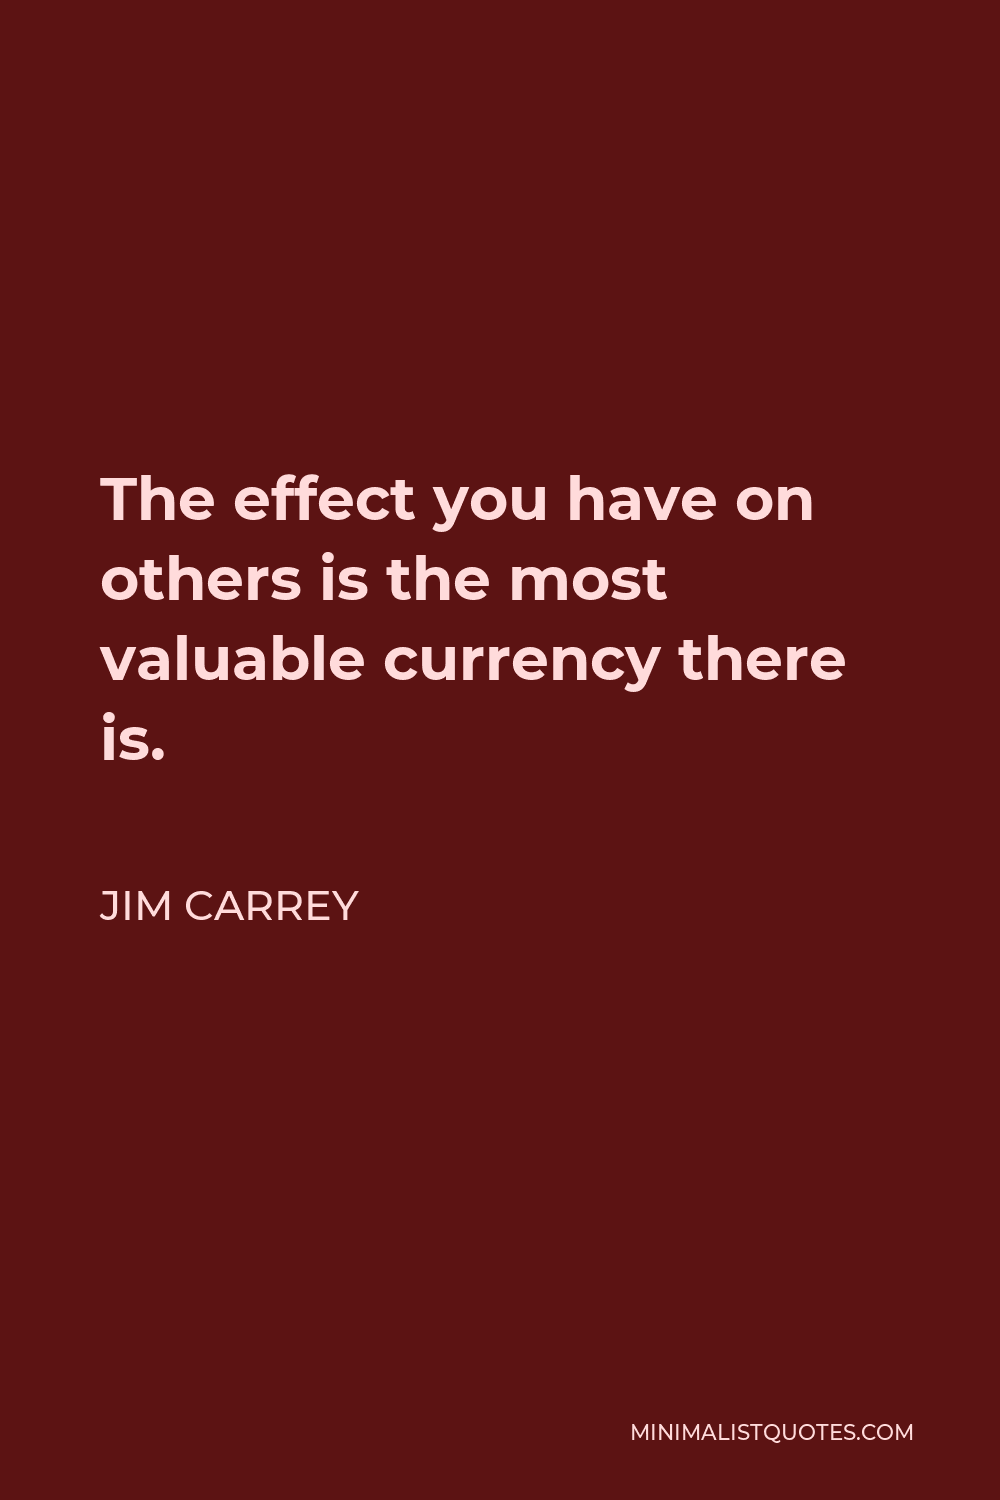 Jim Carrey Quote - The effect you have on others is the most valuable currency there is.